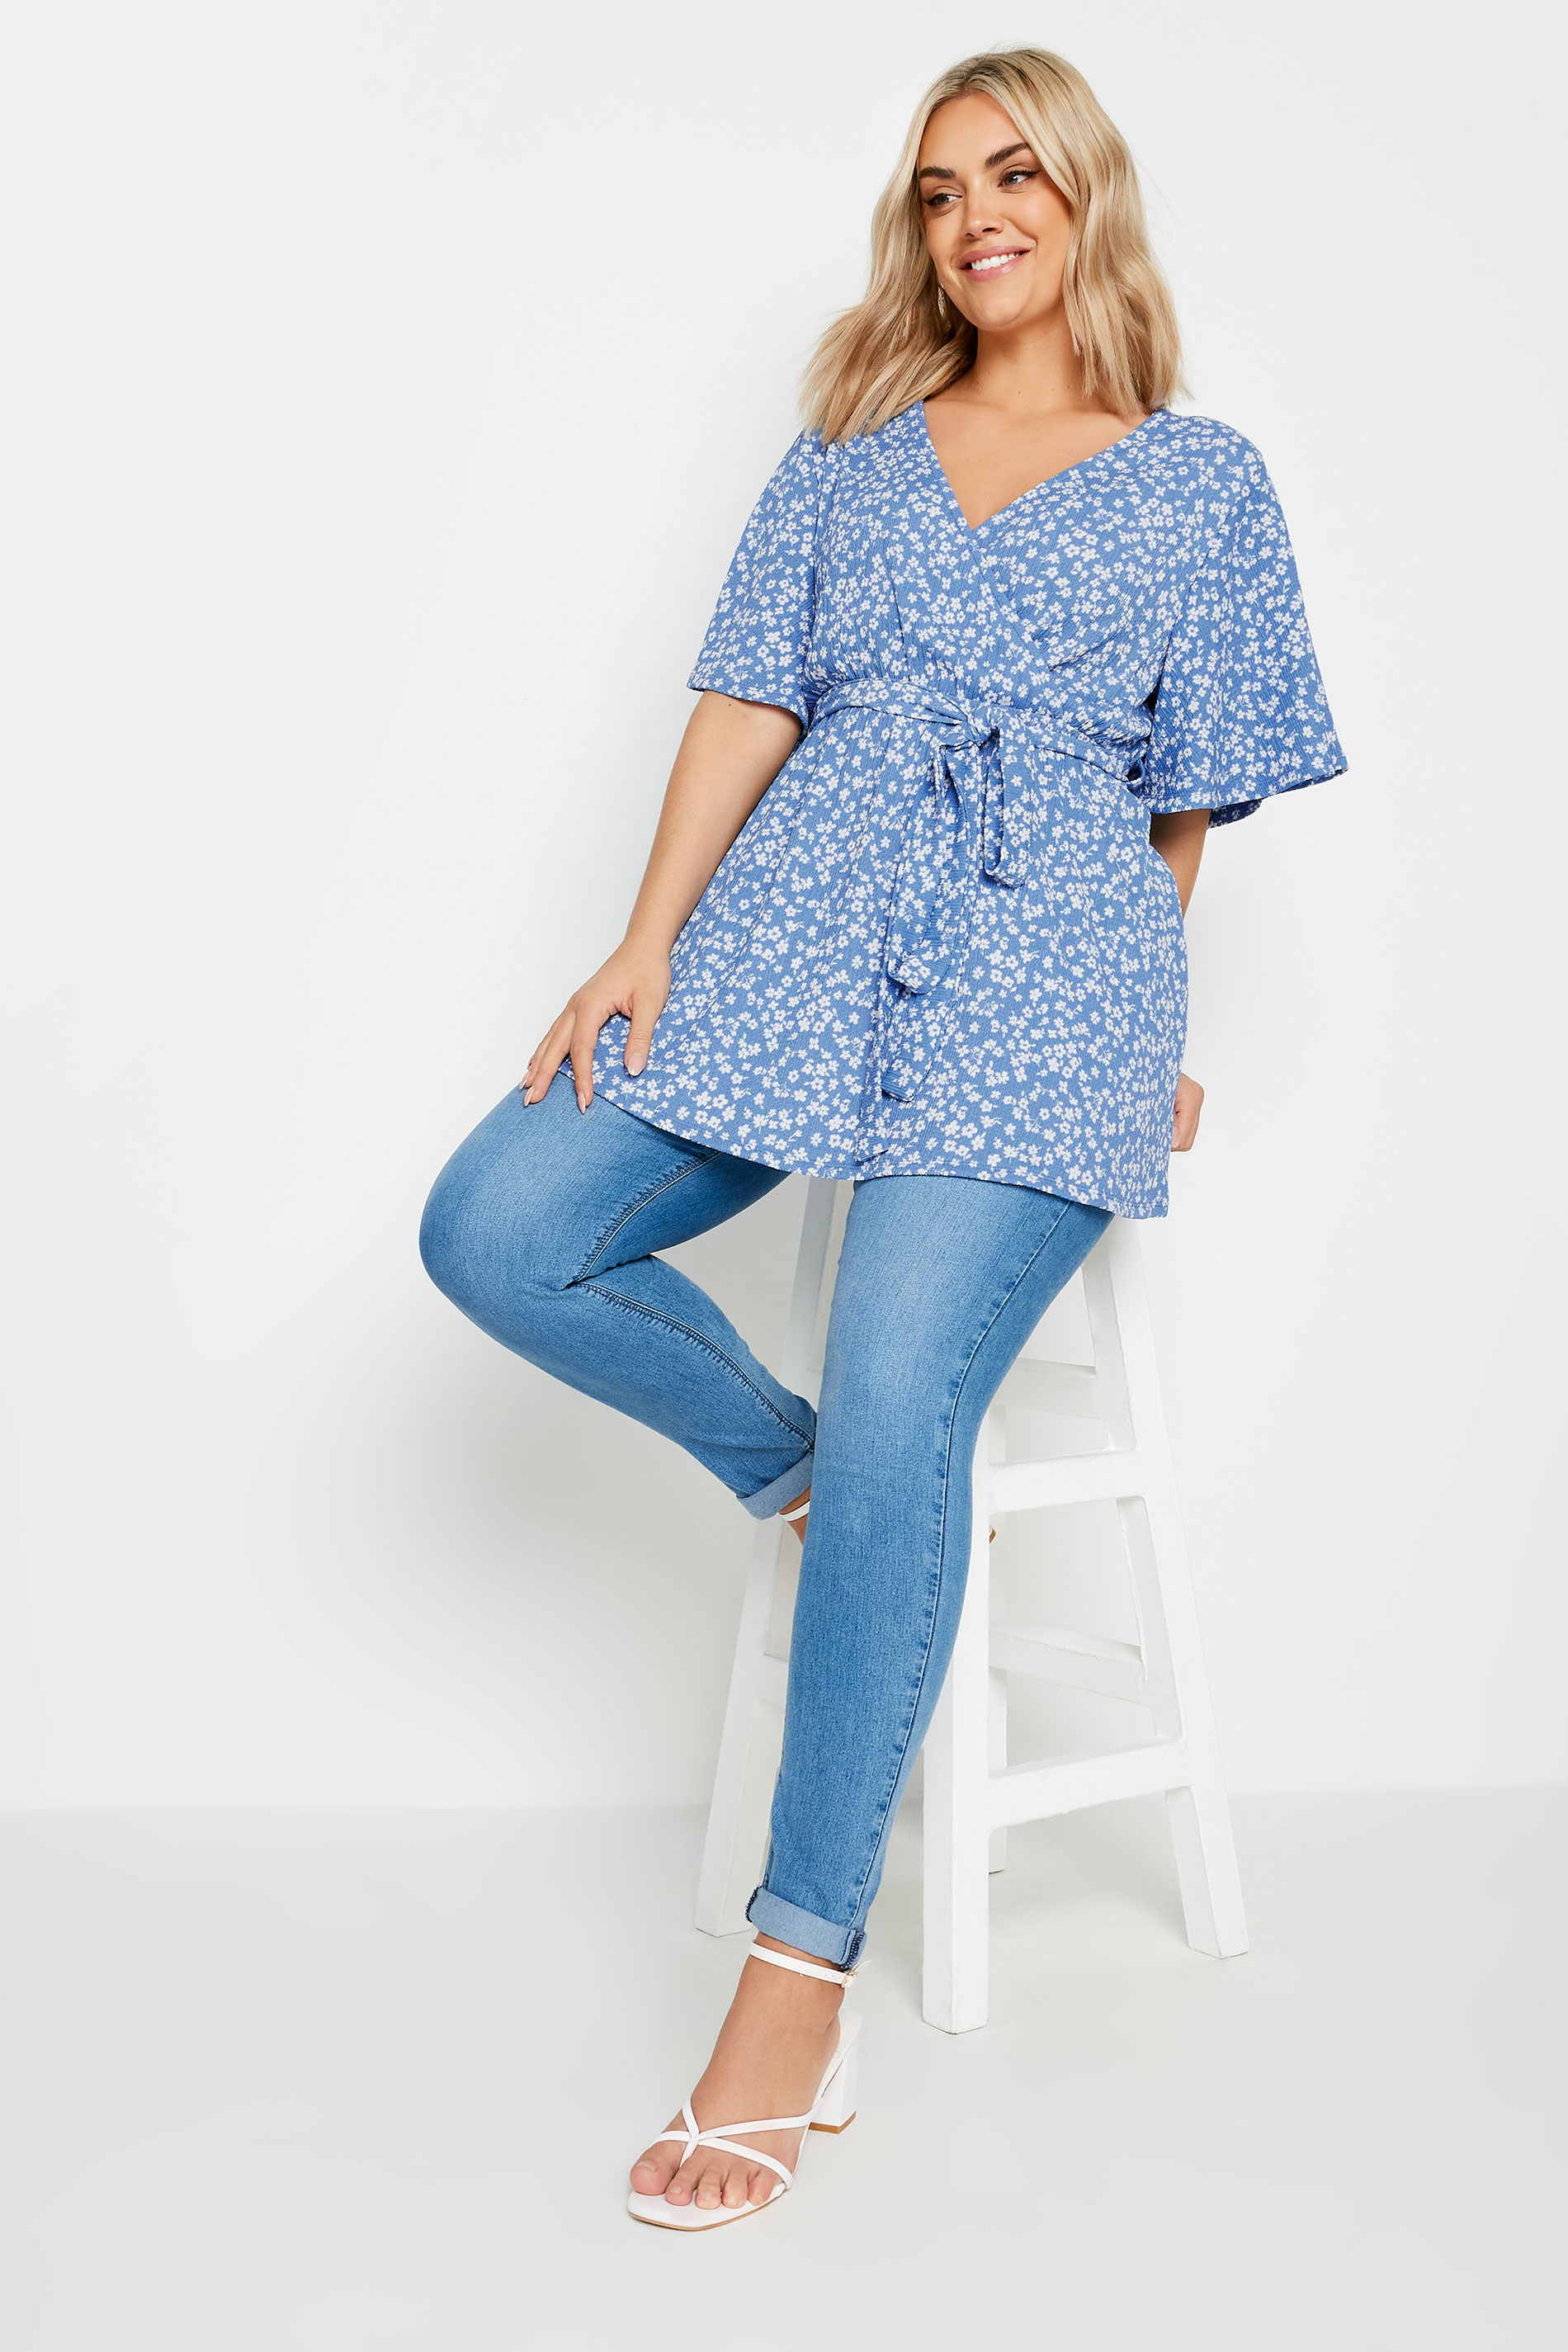 YOURS Plus Size Blue Floral Print Textured Wrap Top | Yours Clothing 2